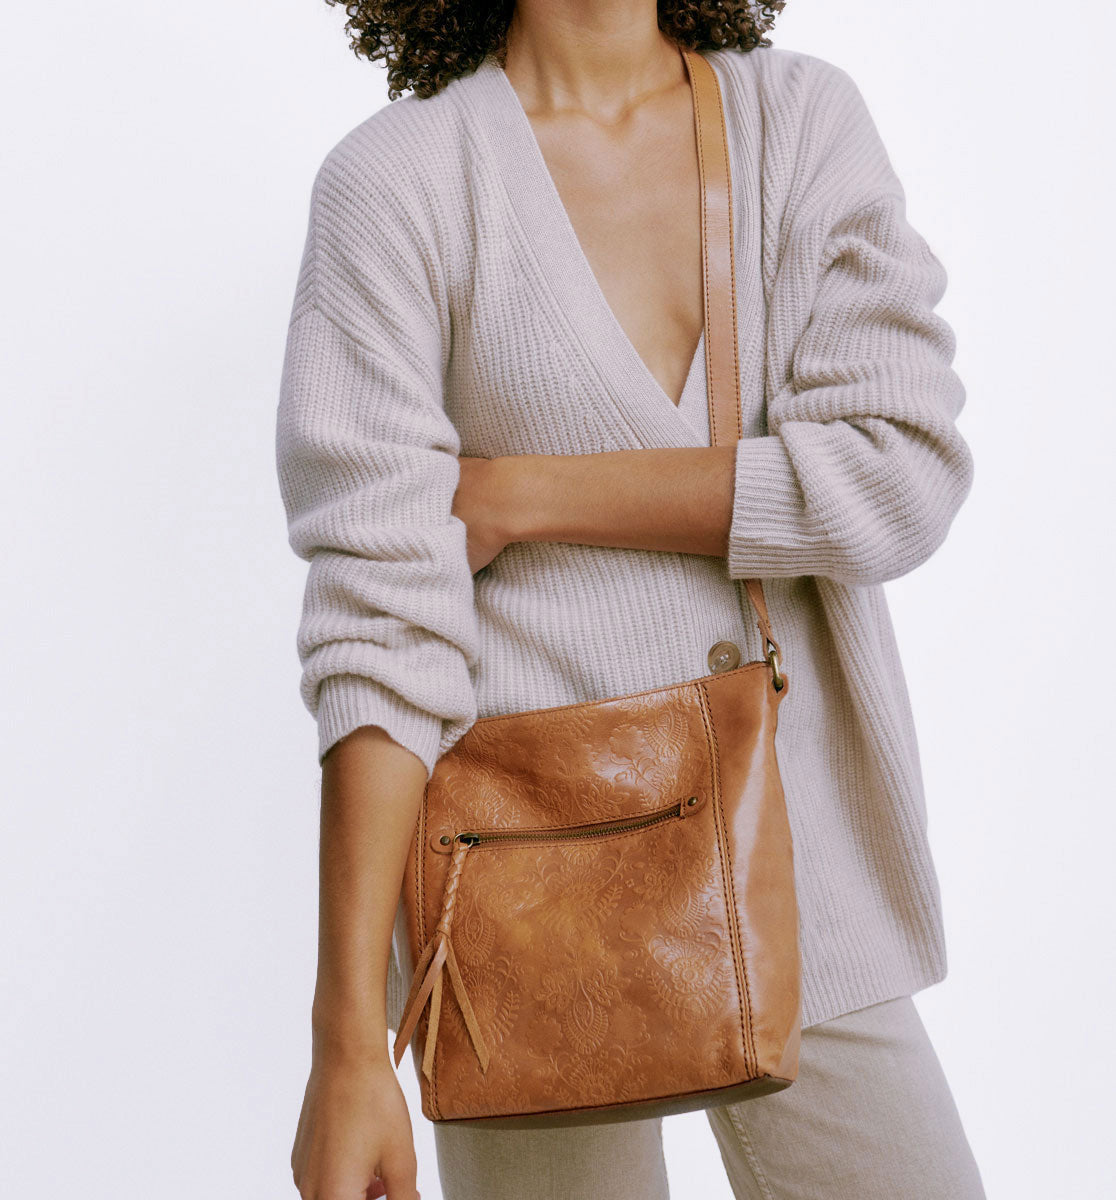 Elevate your fall look with The Sak's latest styles, responsibly made in  new textures like soft suede | CNN Underscored